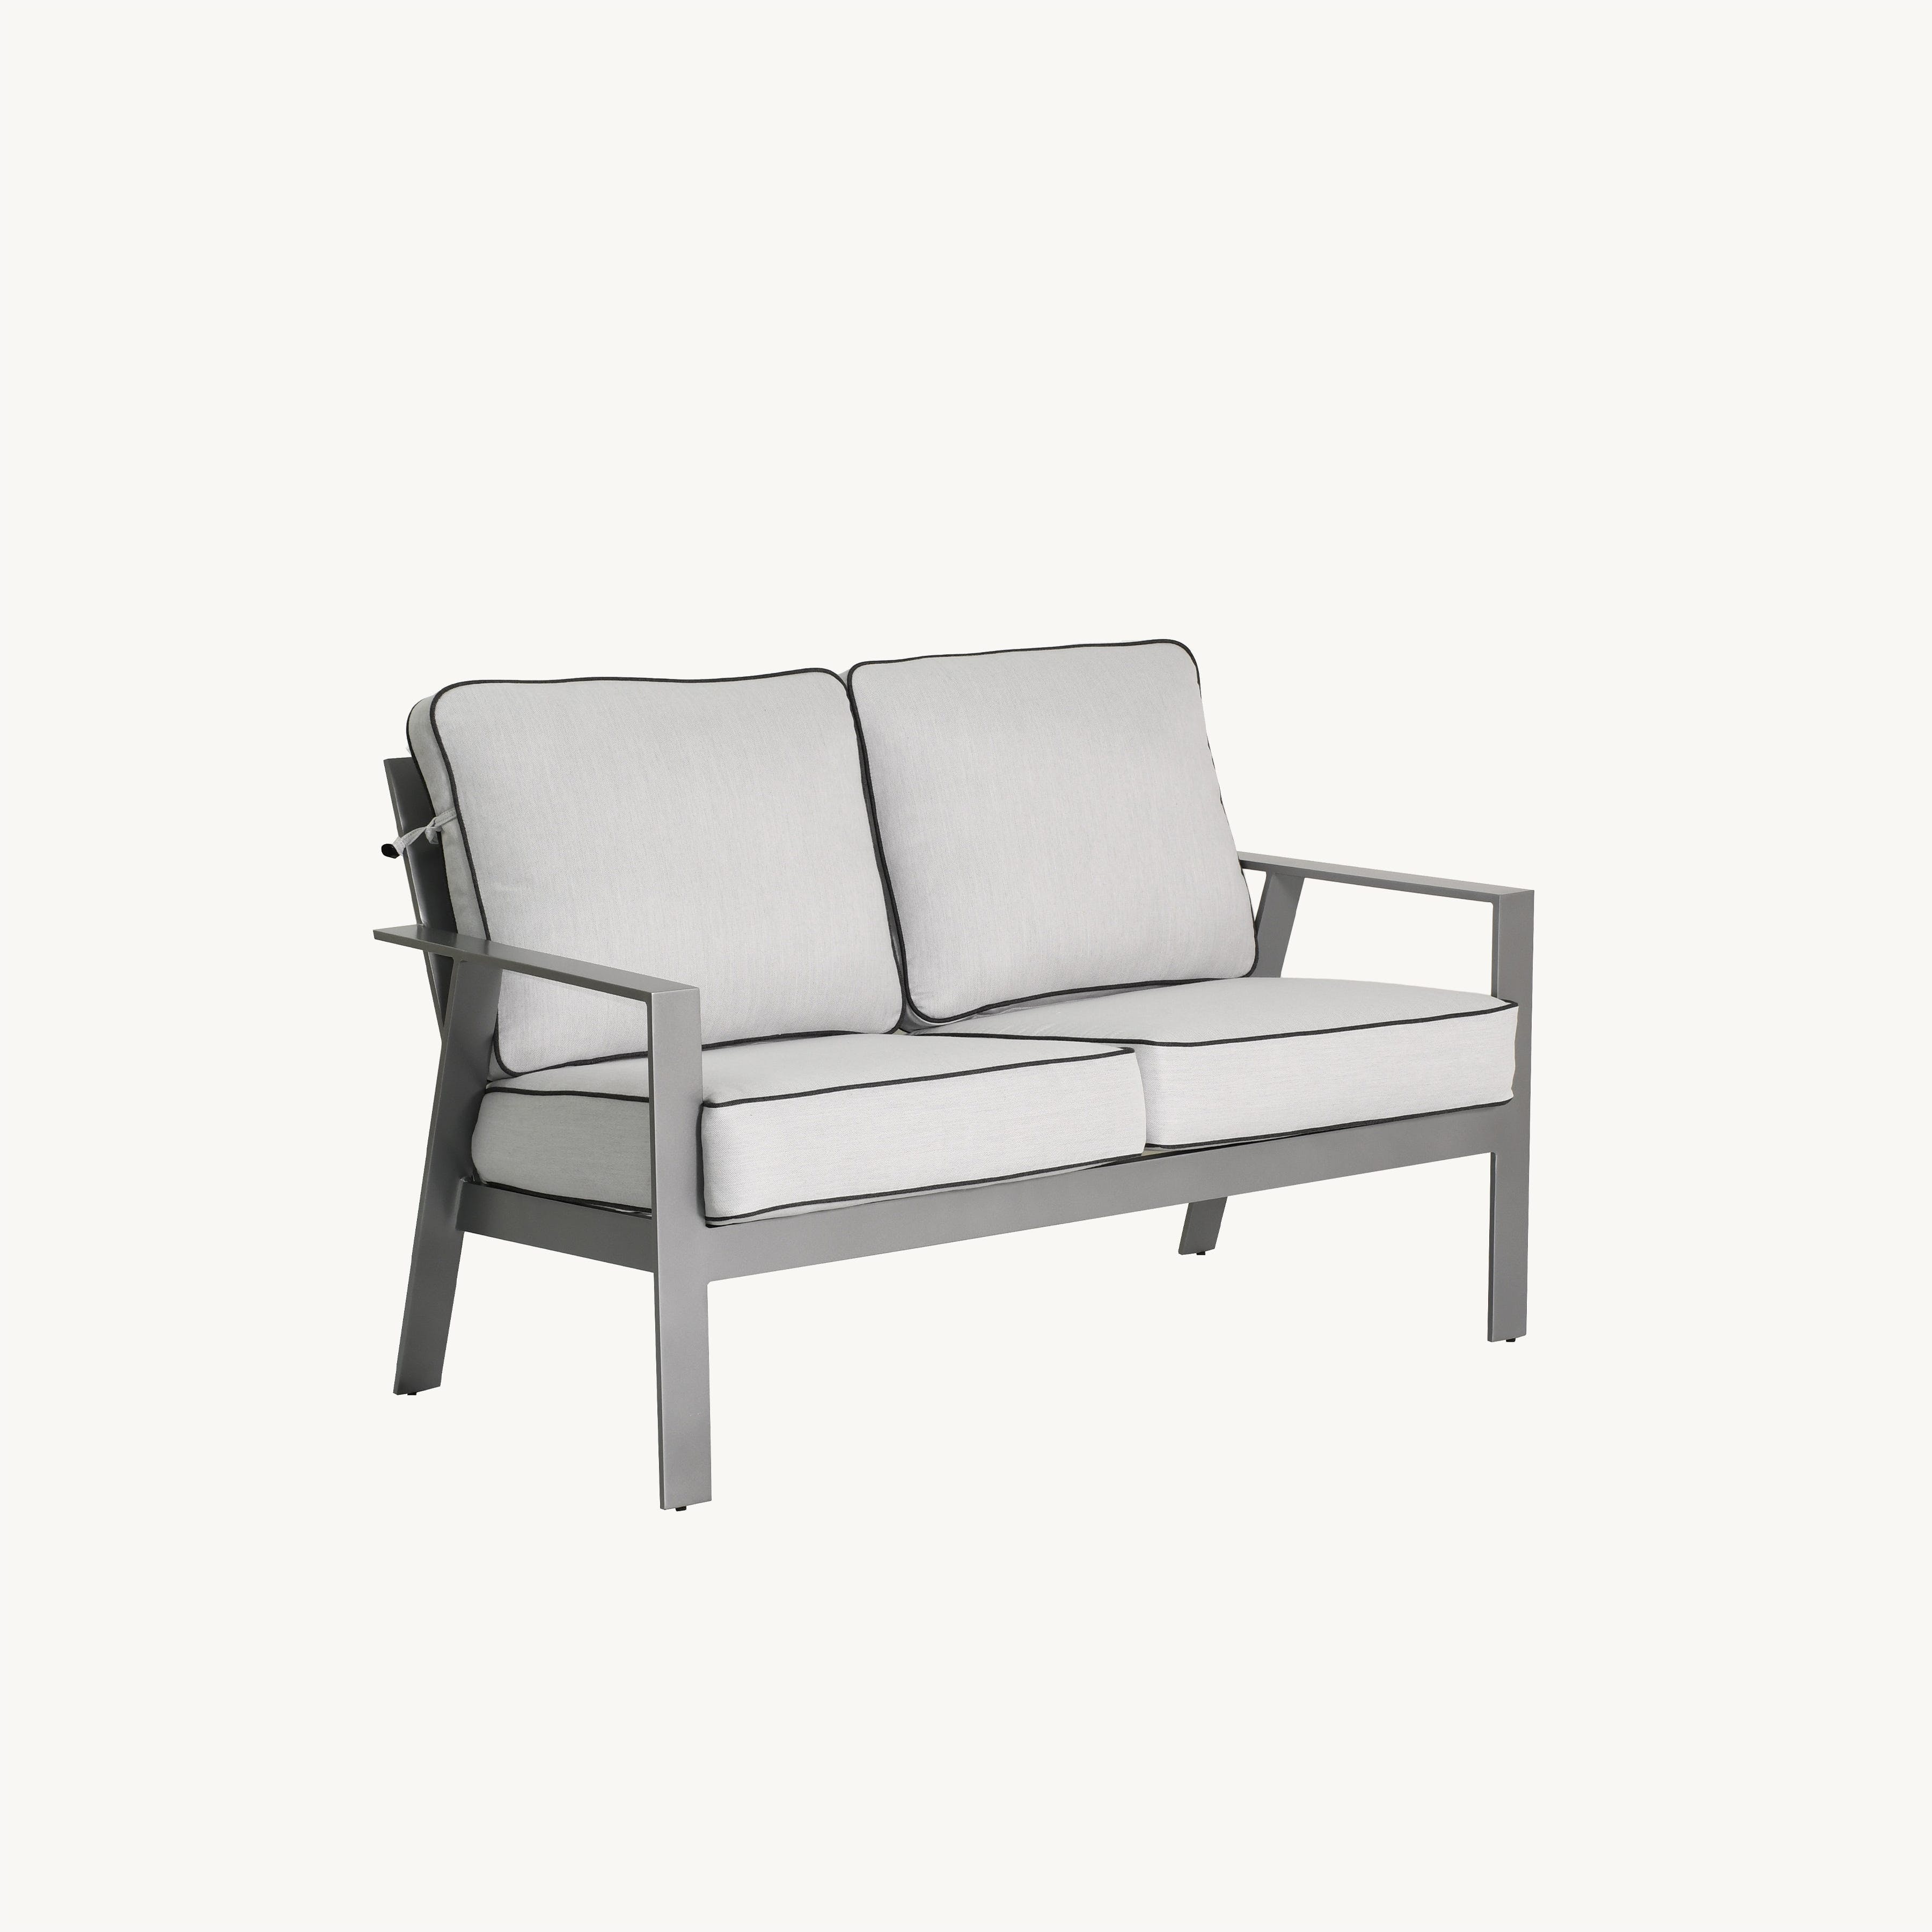 Trento Deep Seating Set By Castelle